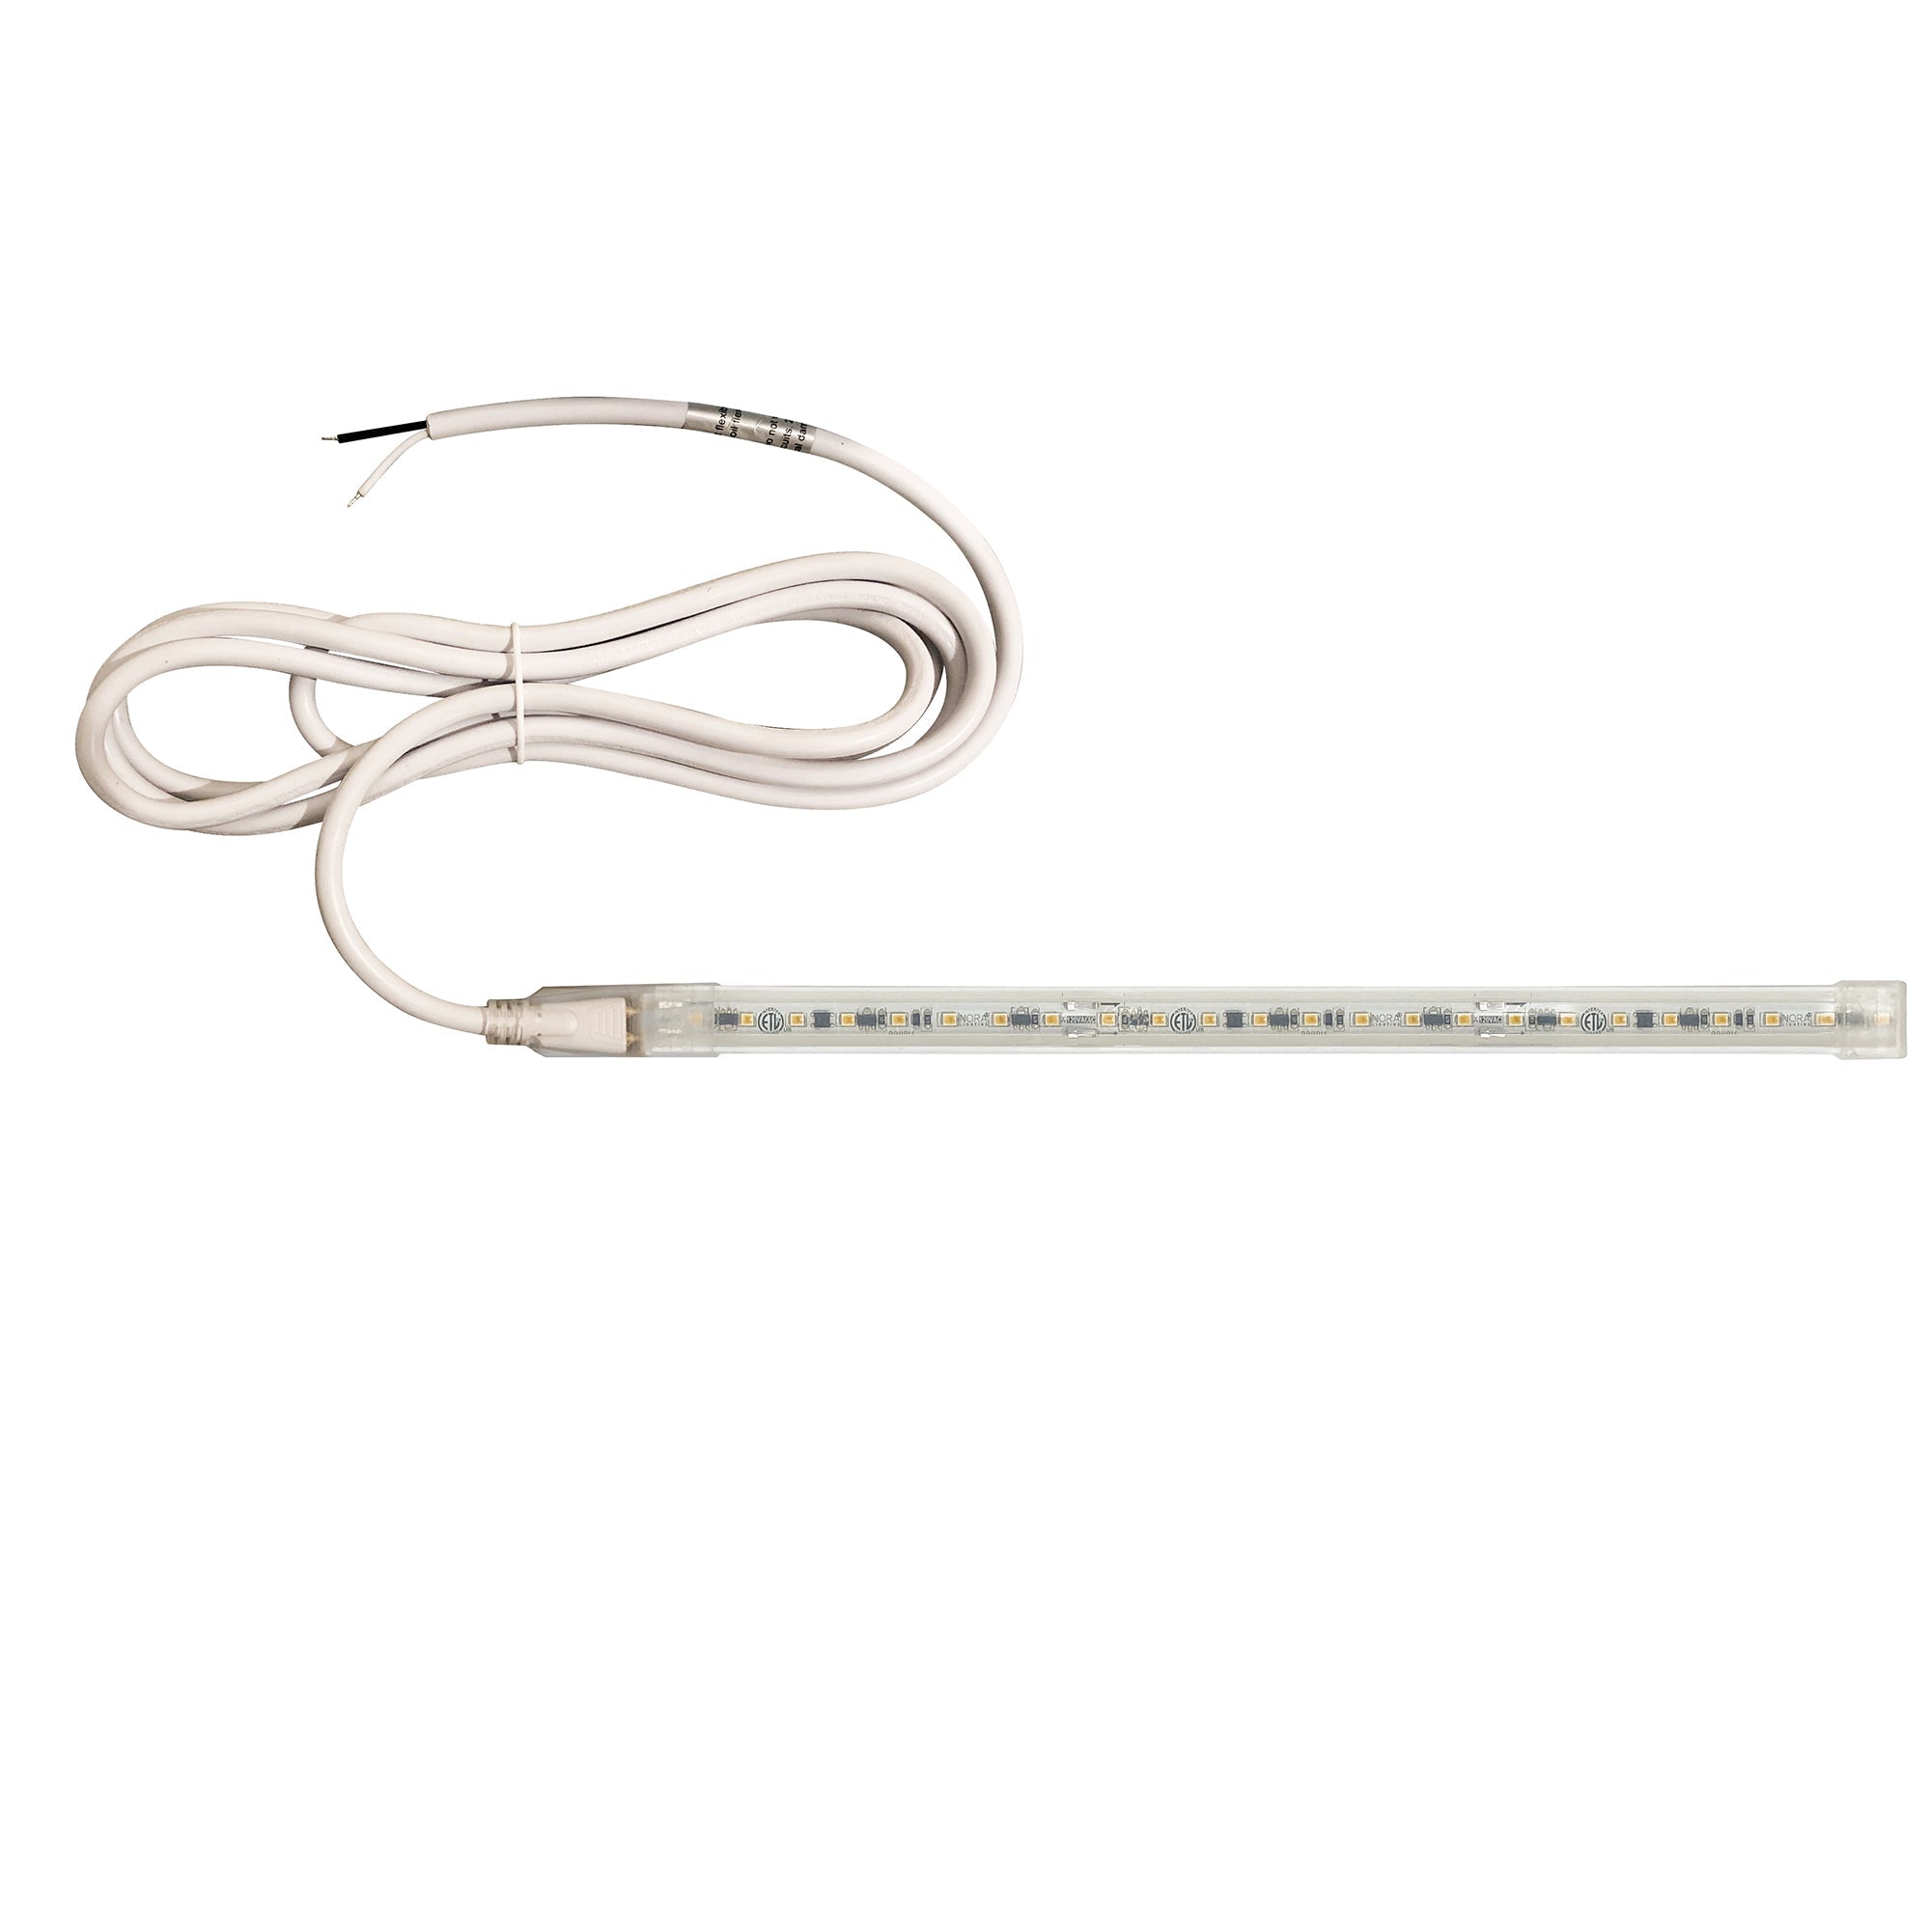 Nora Lighting NUTP13-W111-12-930/HW - Accent / Undercabinet - Custom Cut 111-ft 120V Continuous LED Tape Light, 330lm / 3.6W per foot, 3000K, w/ Mounting Clips and 8' Hardwired Power Cord